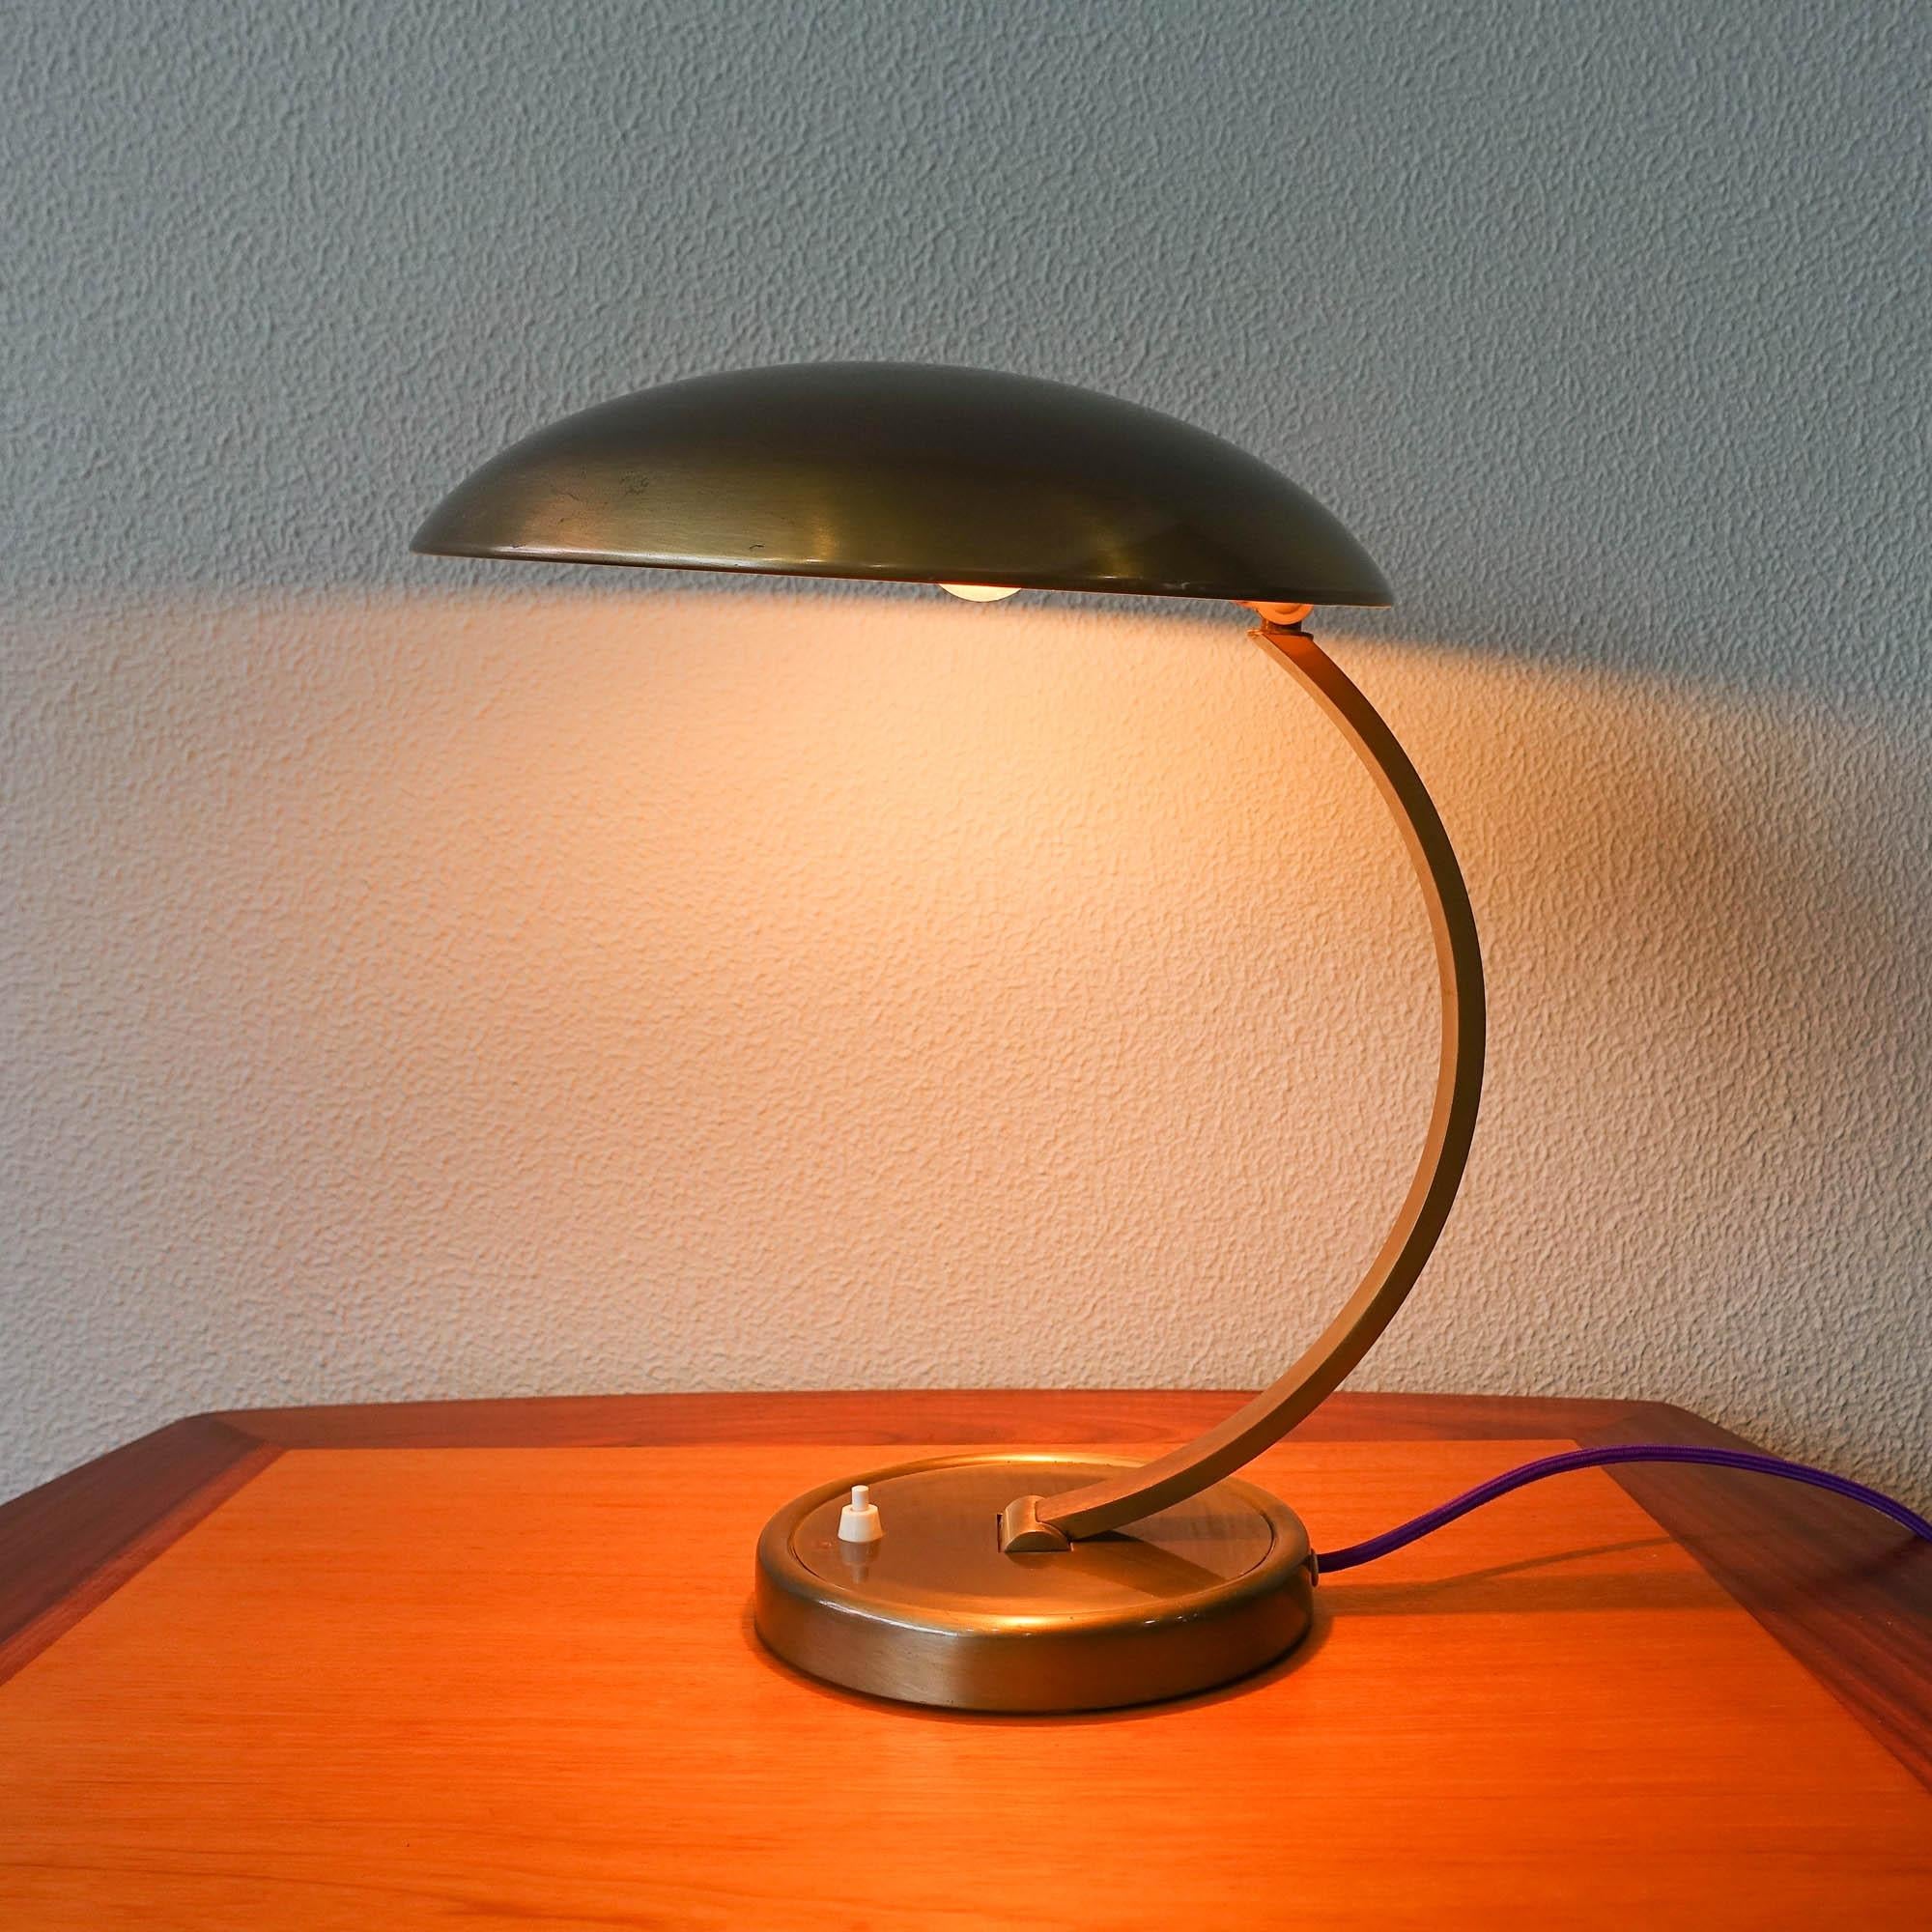 This table lamp, Model 6751, was designed by Christian Dell for Kaiser Idell, in Germany, during the 1950's. It is with original old brass polished finishing. With original label on the lampshade. In very good vintage condition.